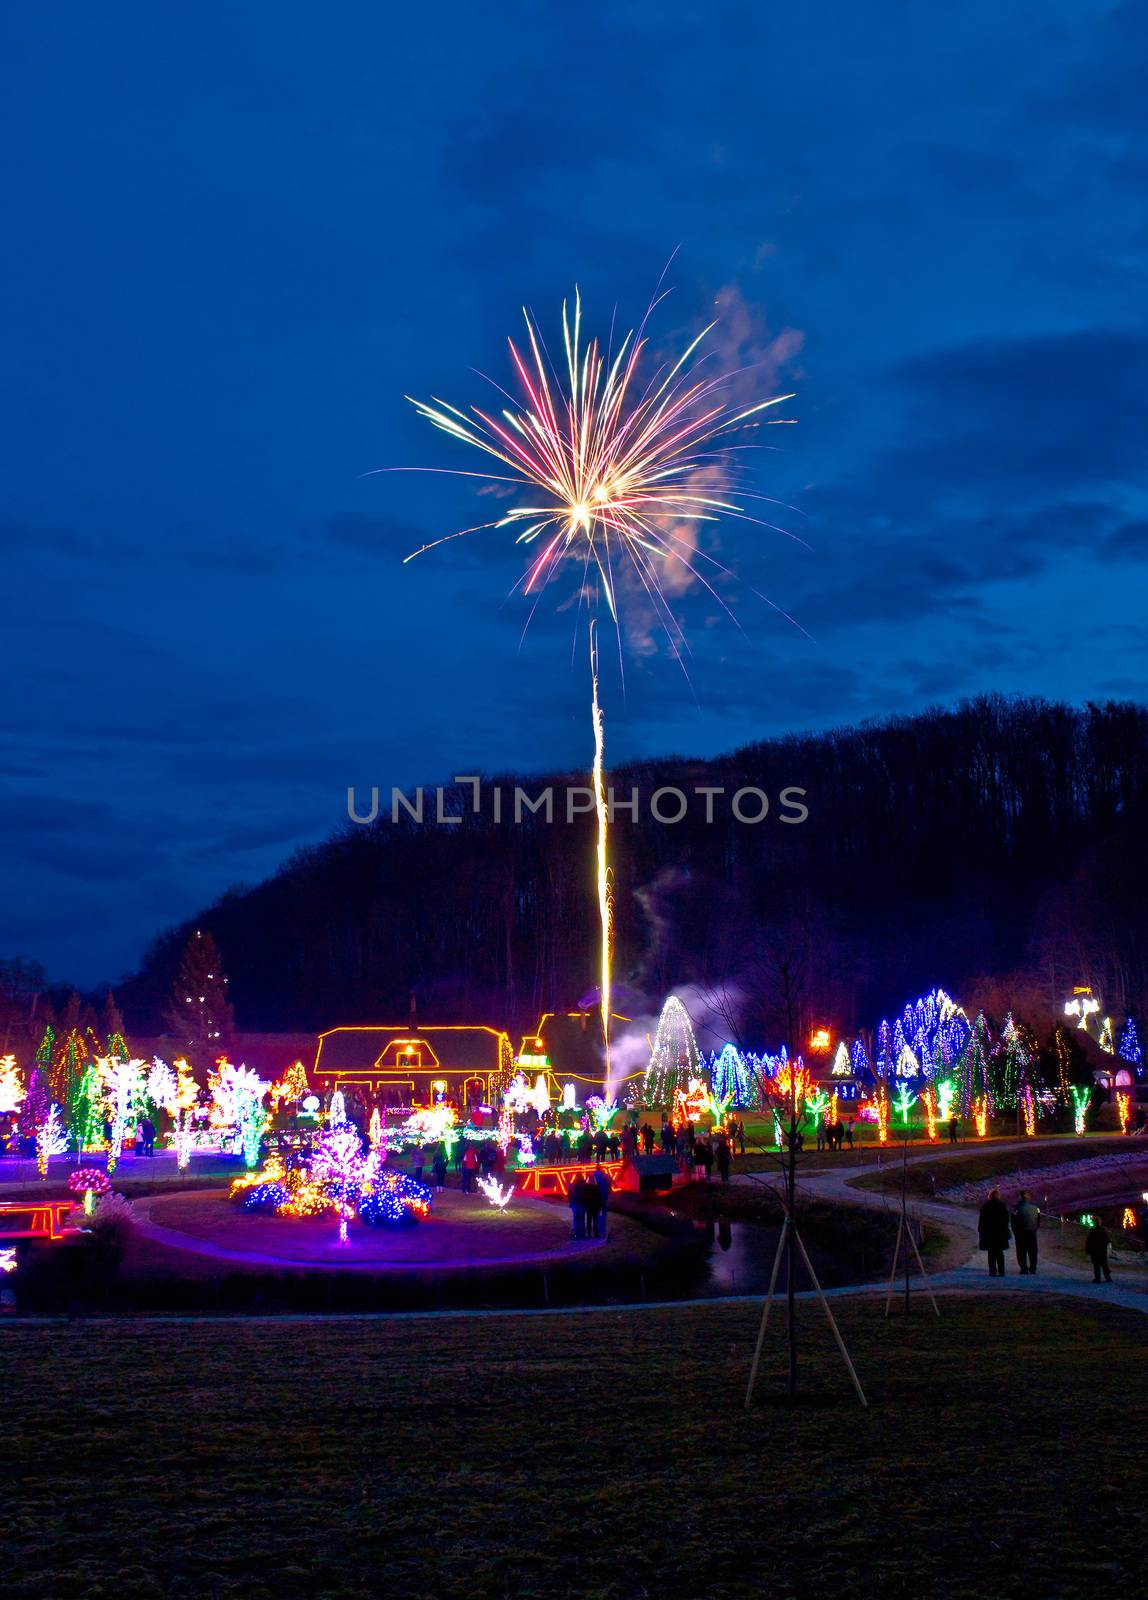 Village in Christmas lights fireworks by xbrchx